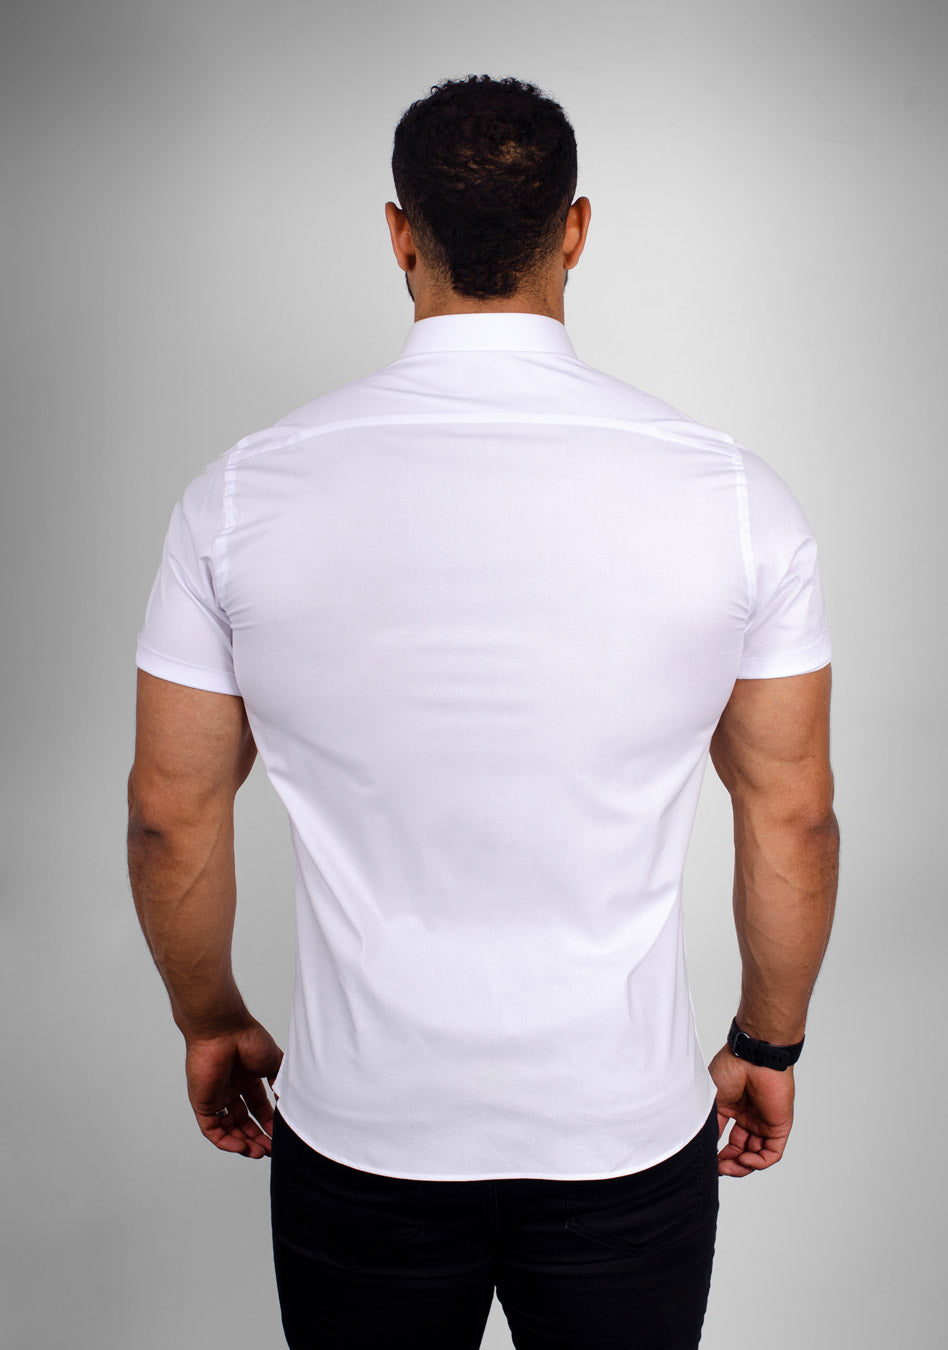 White short sleeve athletic fit shirt on an athletically built model, showcasing the muscle fit design that enhances physique, with stretch fabric for comfort and mobility